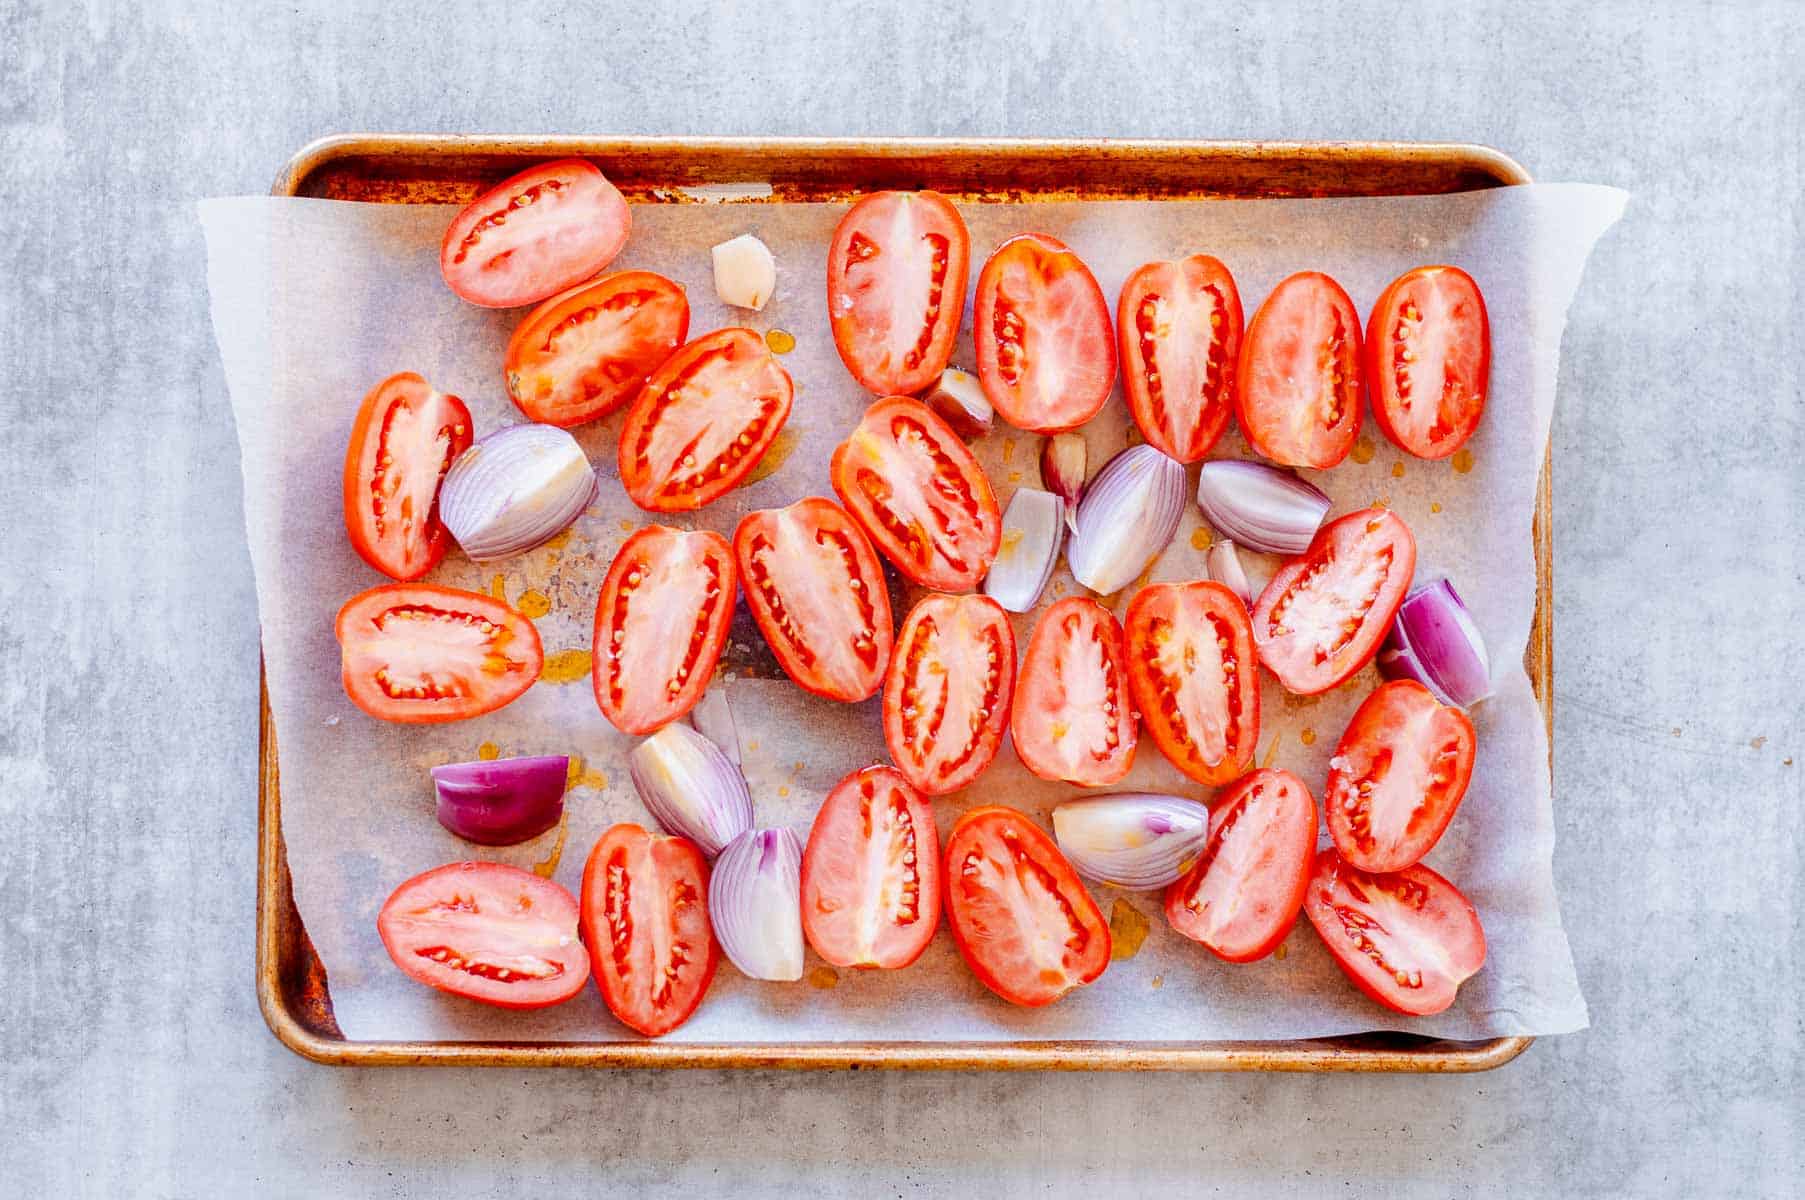 Tomatoes, red onion and garlic on a baking tray.